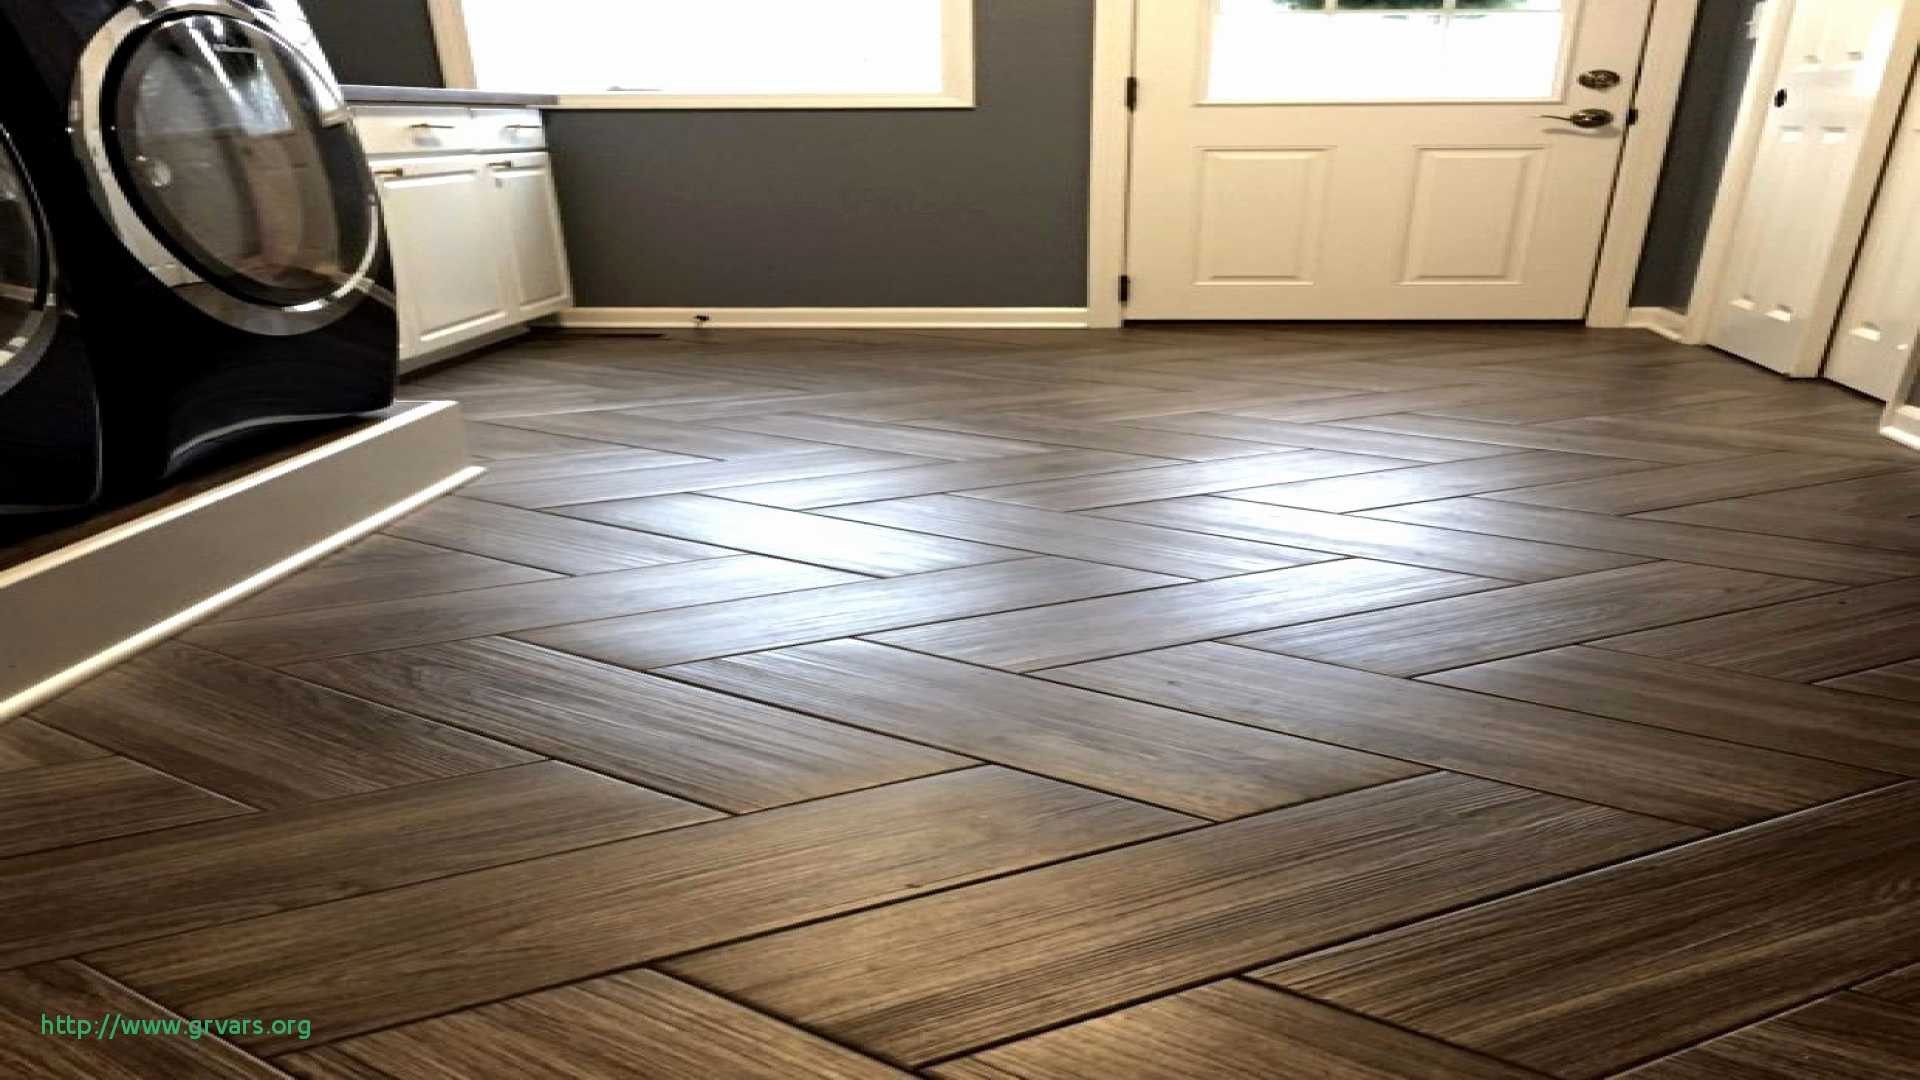 27 Wonderful Hardwood Flooring Options and Cost 2024 free download hardwood flooring options and cost of 20 luxe how are hardwood floors installed ideas blog with kitchen floor tiles home depot elegant s media cache ak0 pinimg 736x 43 0d 97 best